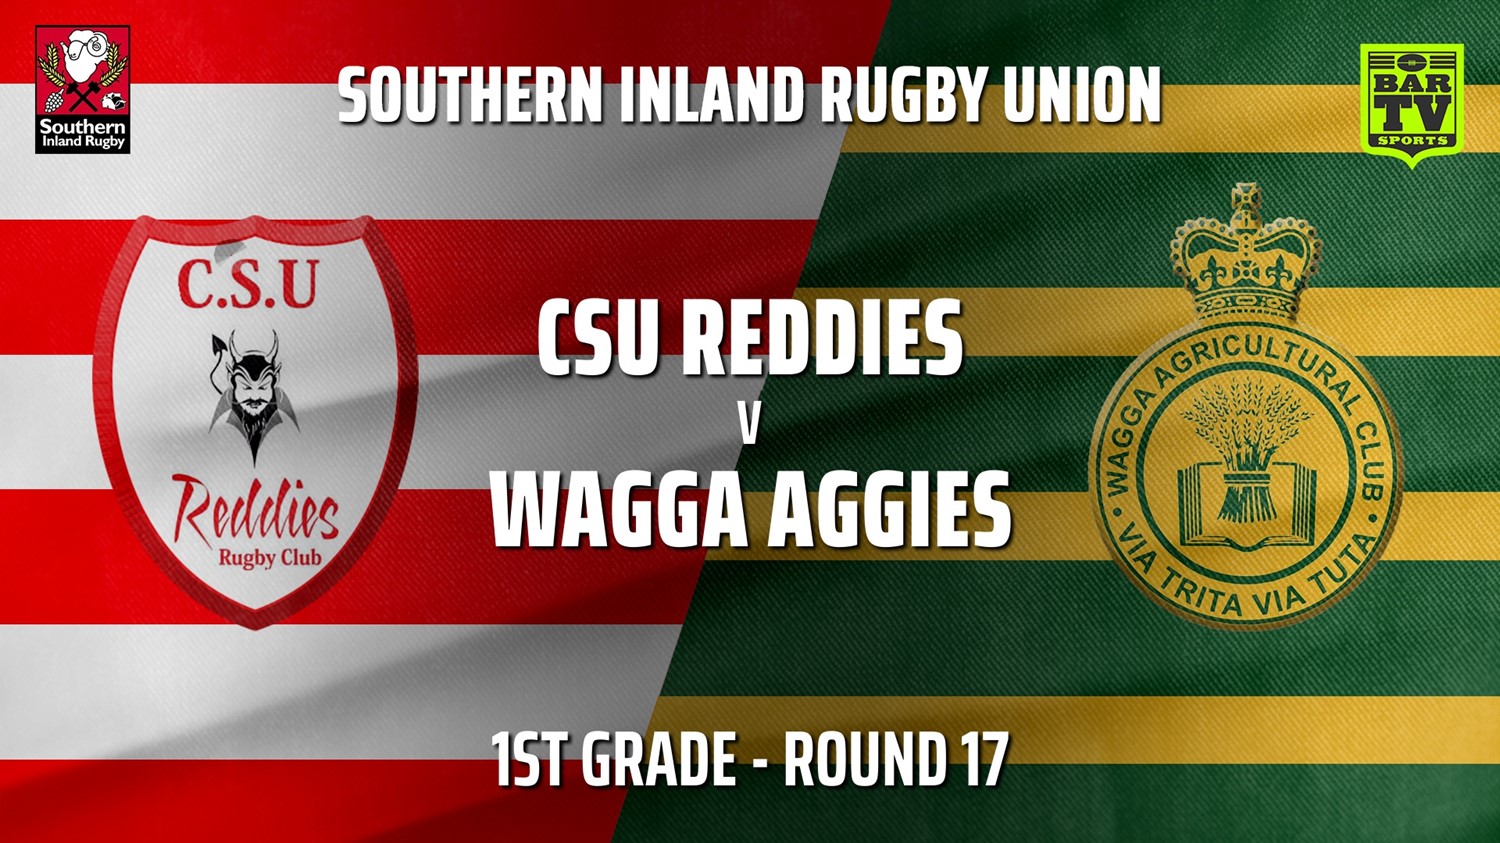 210807-Southern Inland Rugby Union Round 17 - 1st Grade - CSU Reddies v Wagga Agricultural College Minigame Slate Image